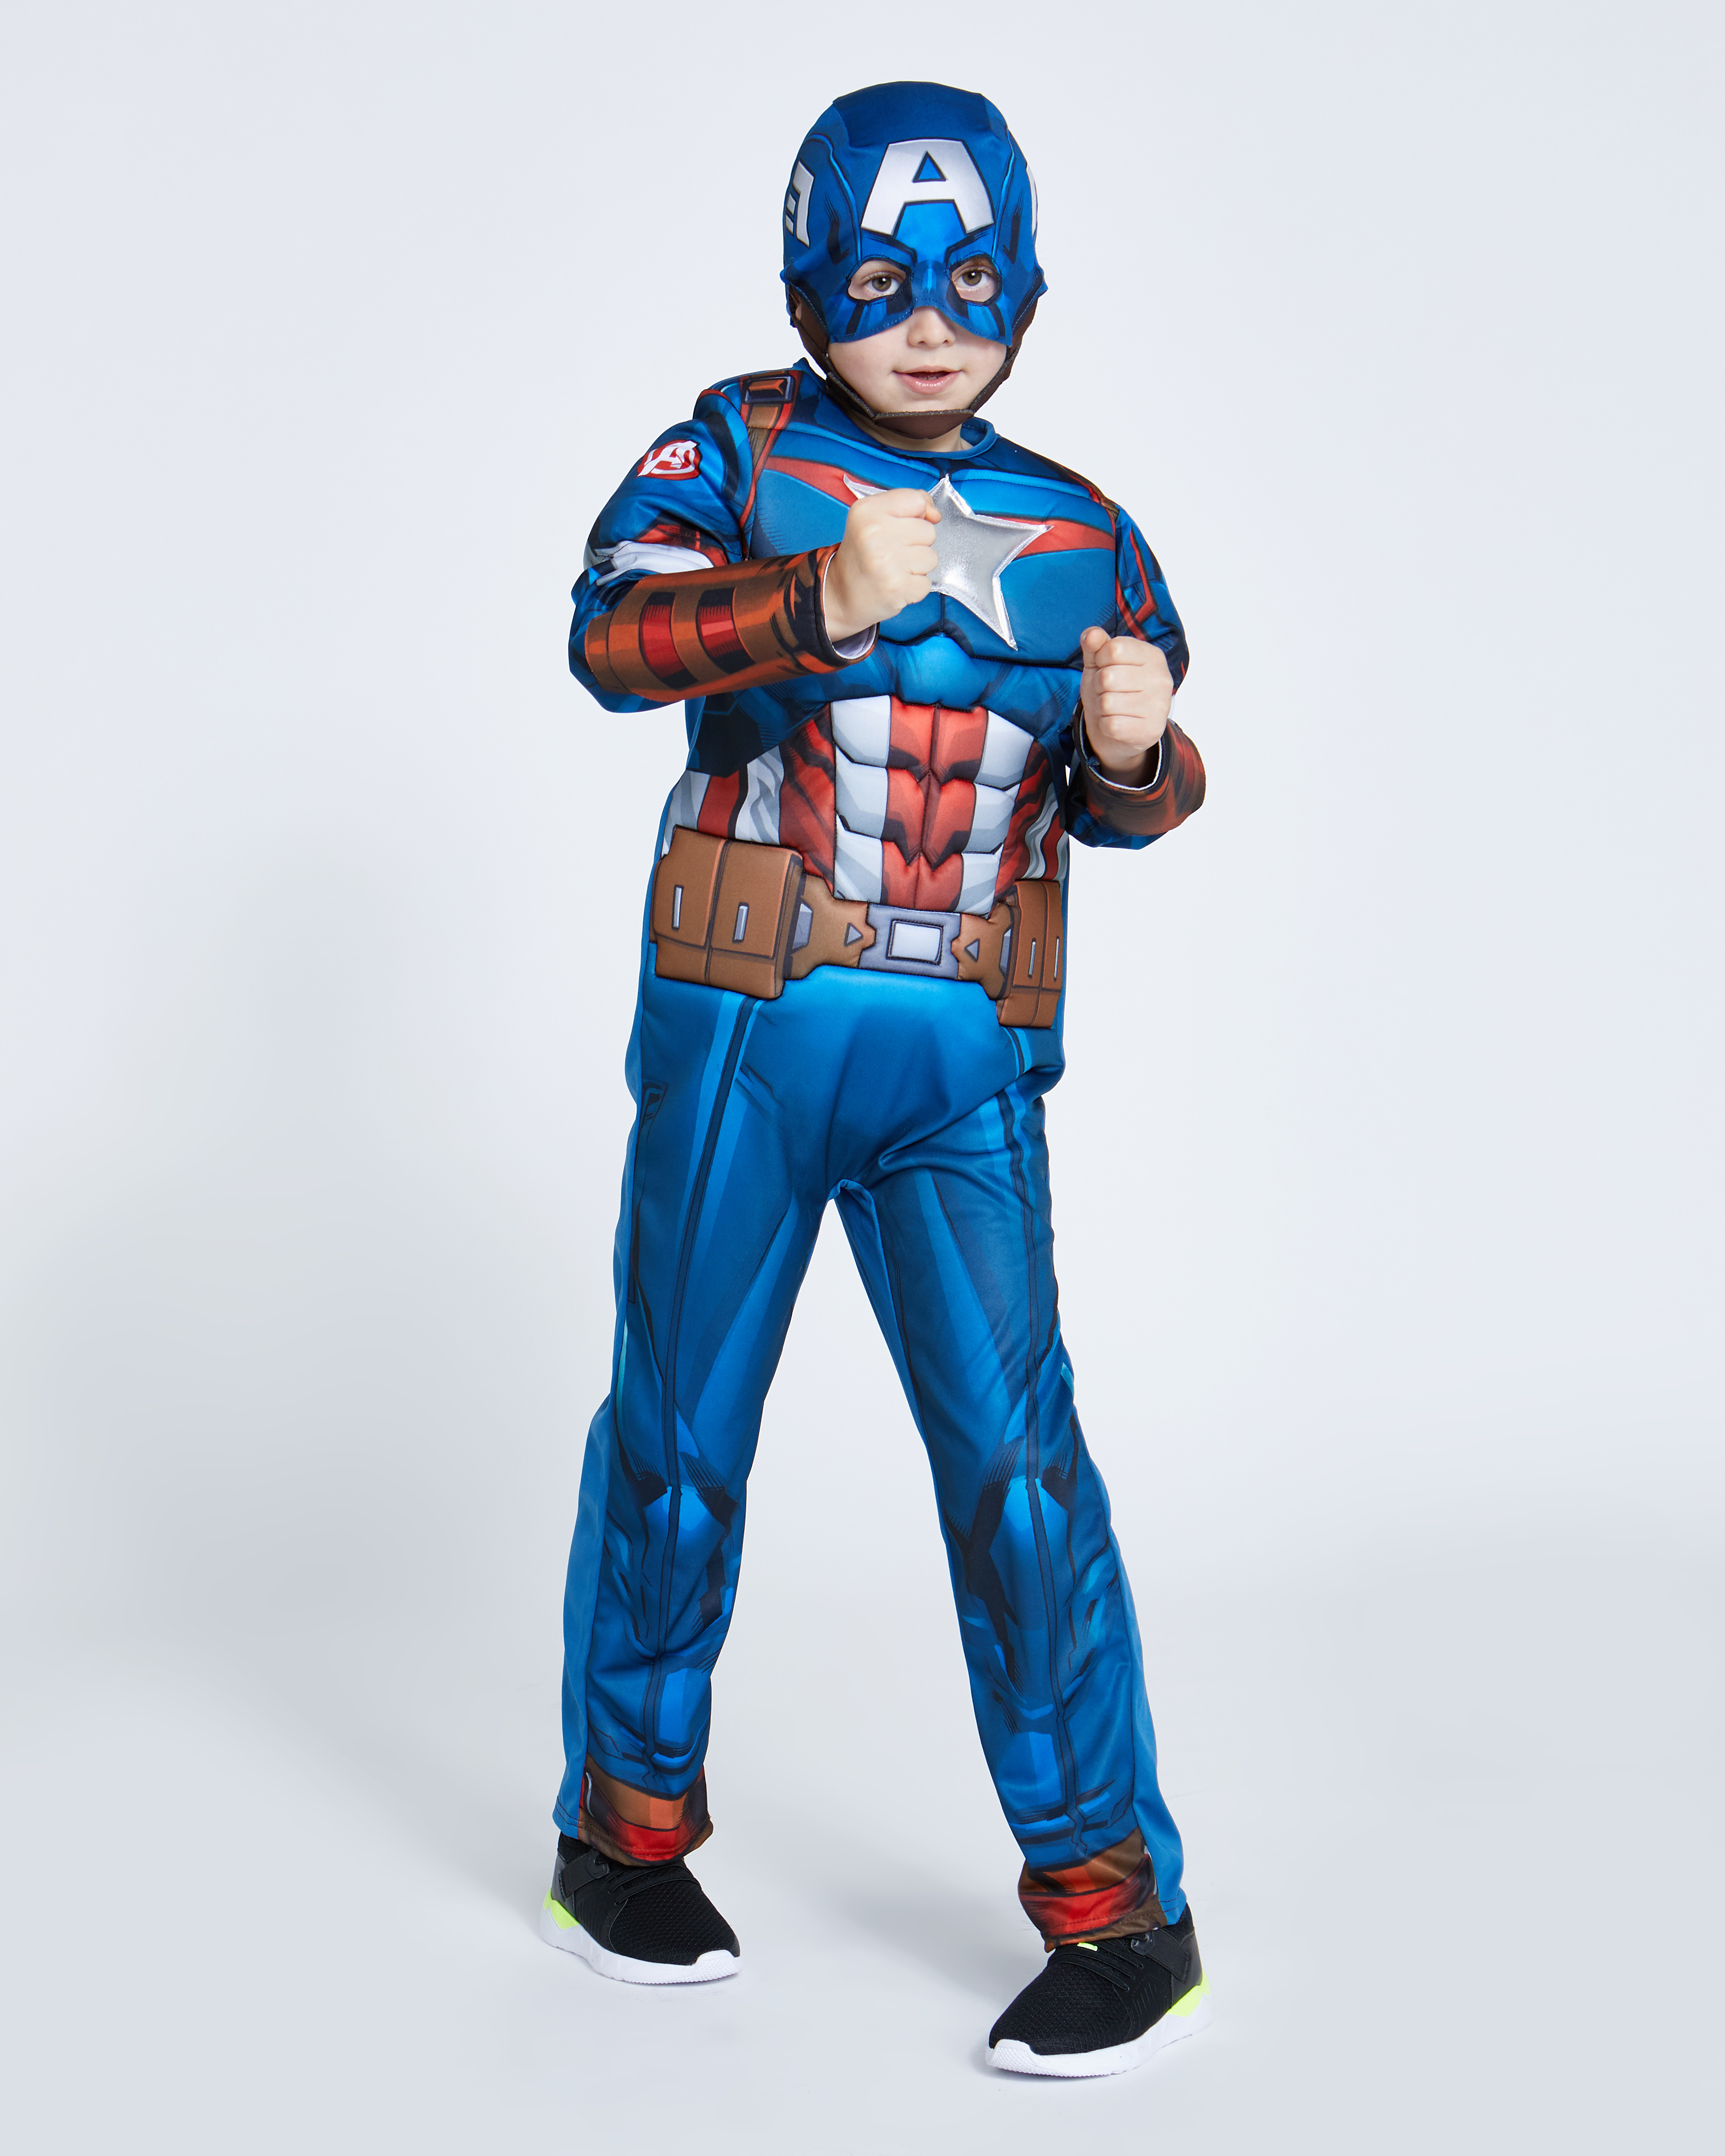 Buy CHRISLEY ENTERPRISES Captain america dress (Include) Mask + cape +  shield cosplay Clothes Sets Halloween Costumes (2-3 years) Online at Low  Prices in India - Amazon.in